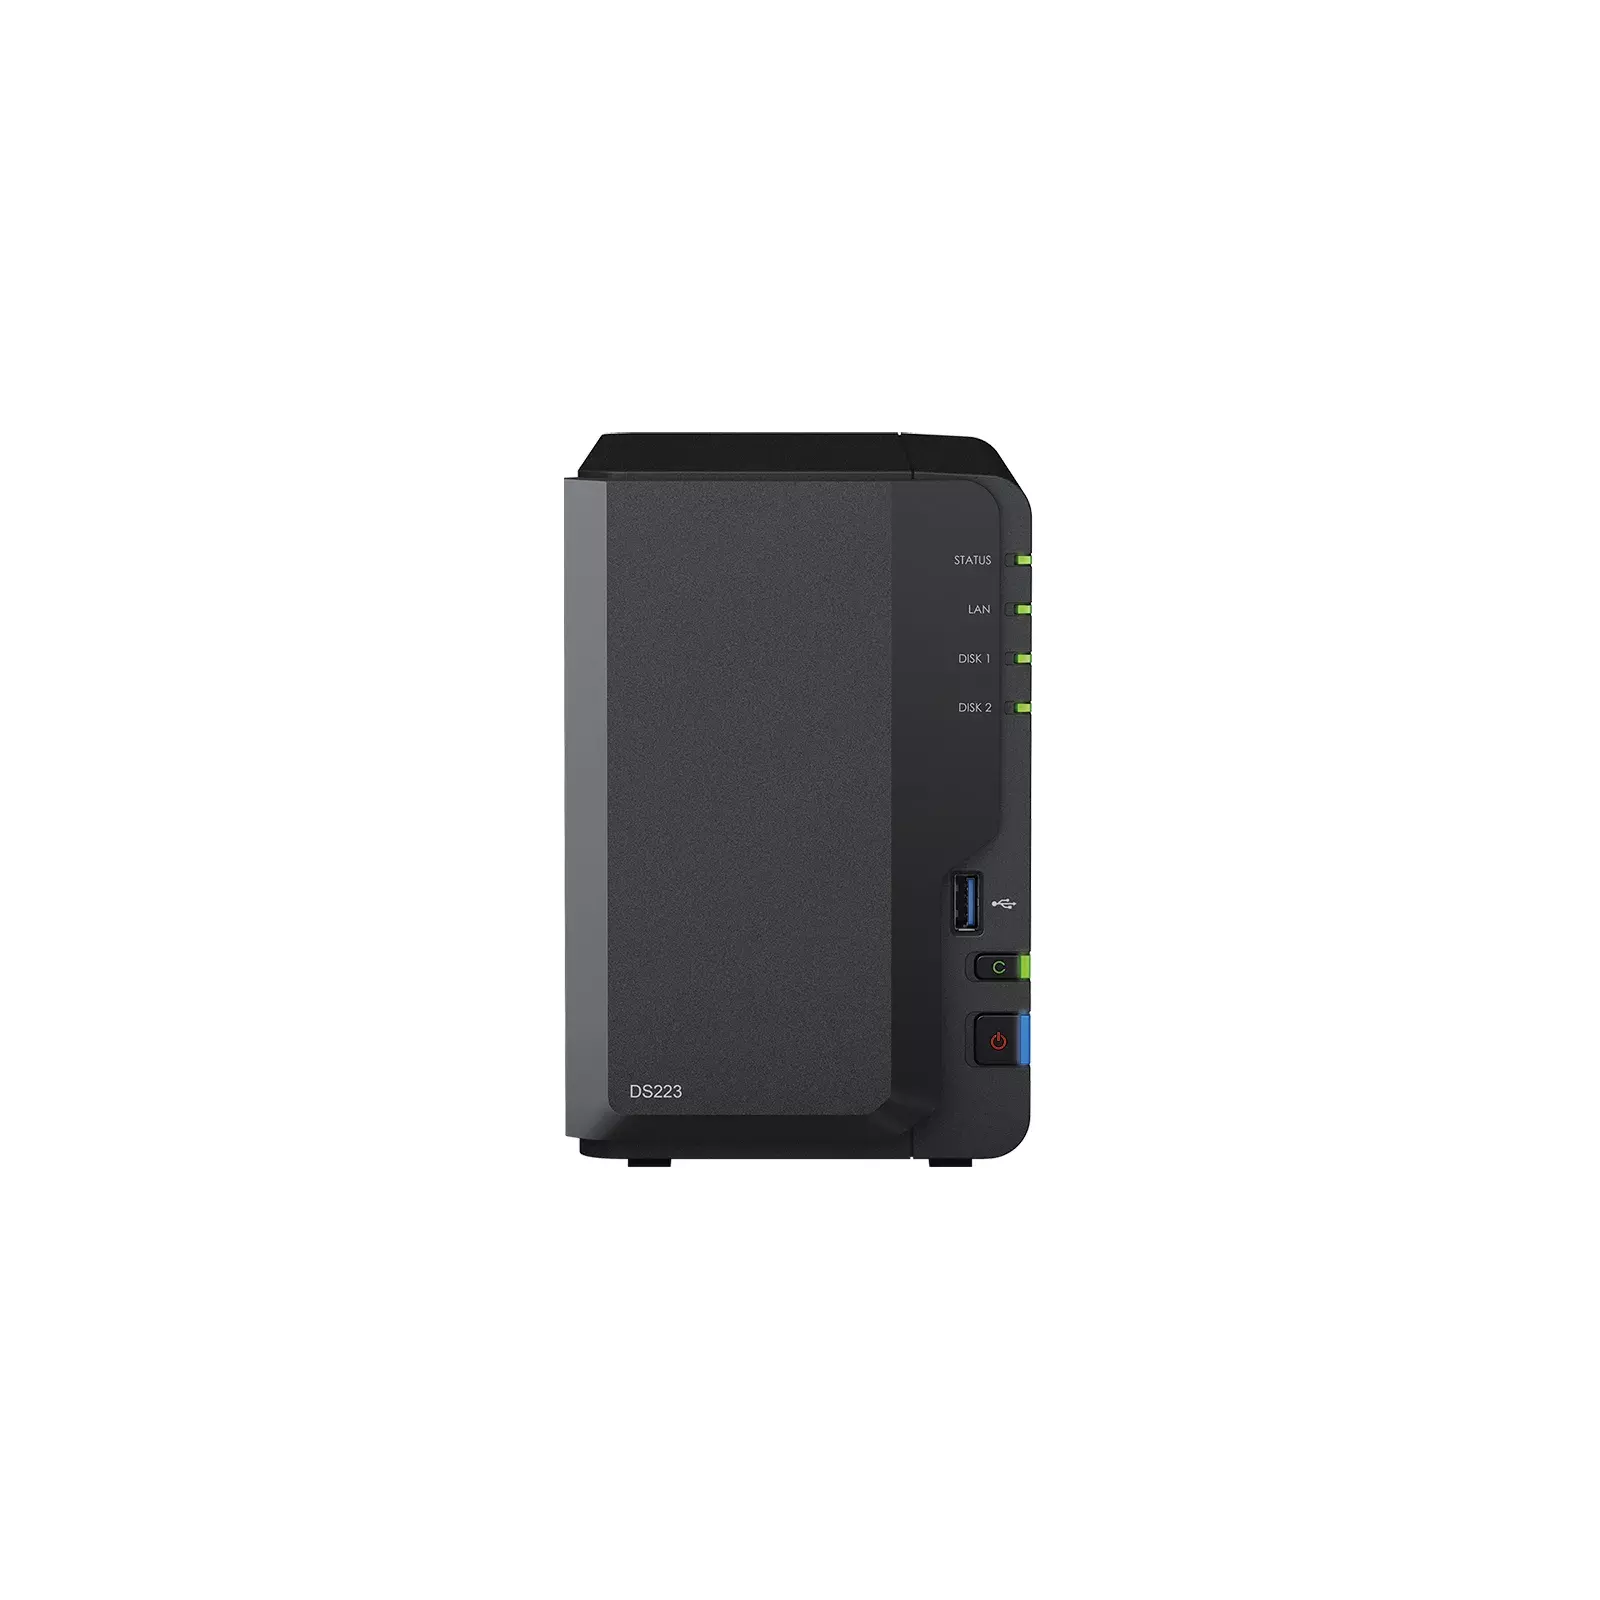 SYNOLOGY DS223 Photo 2